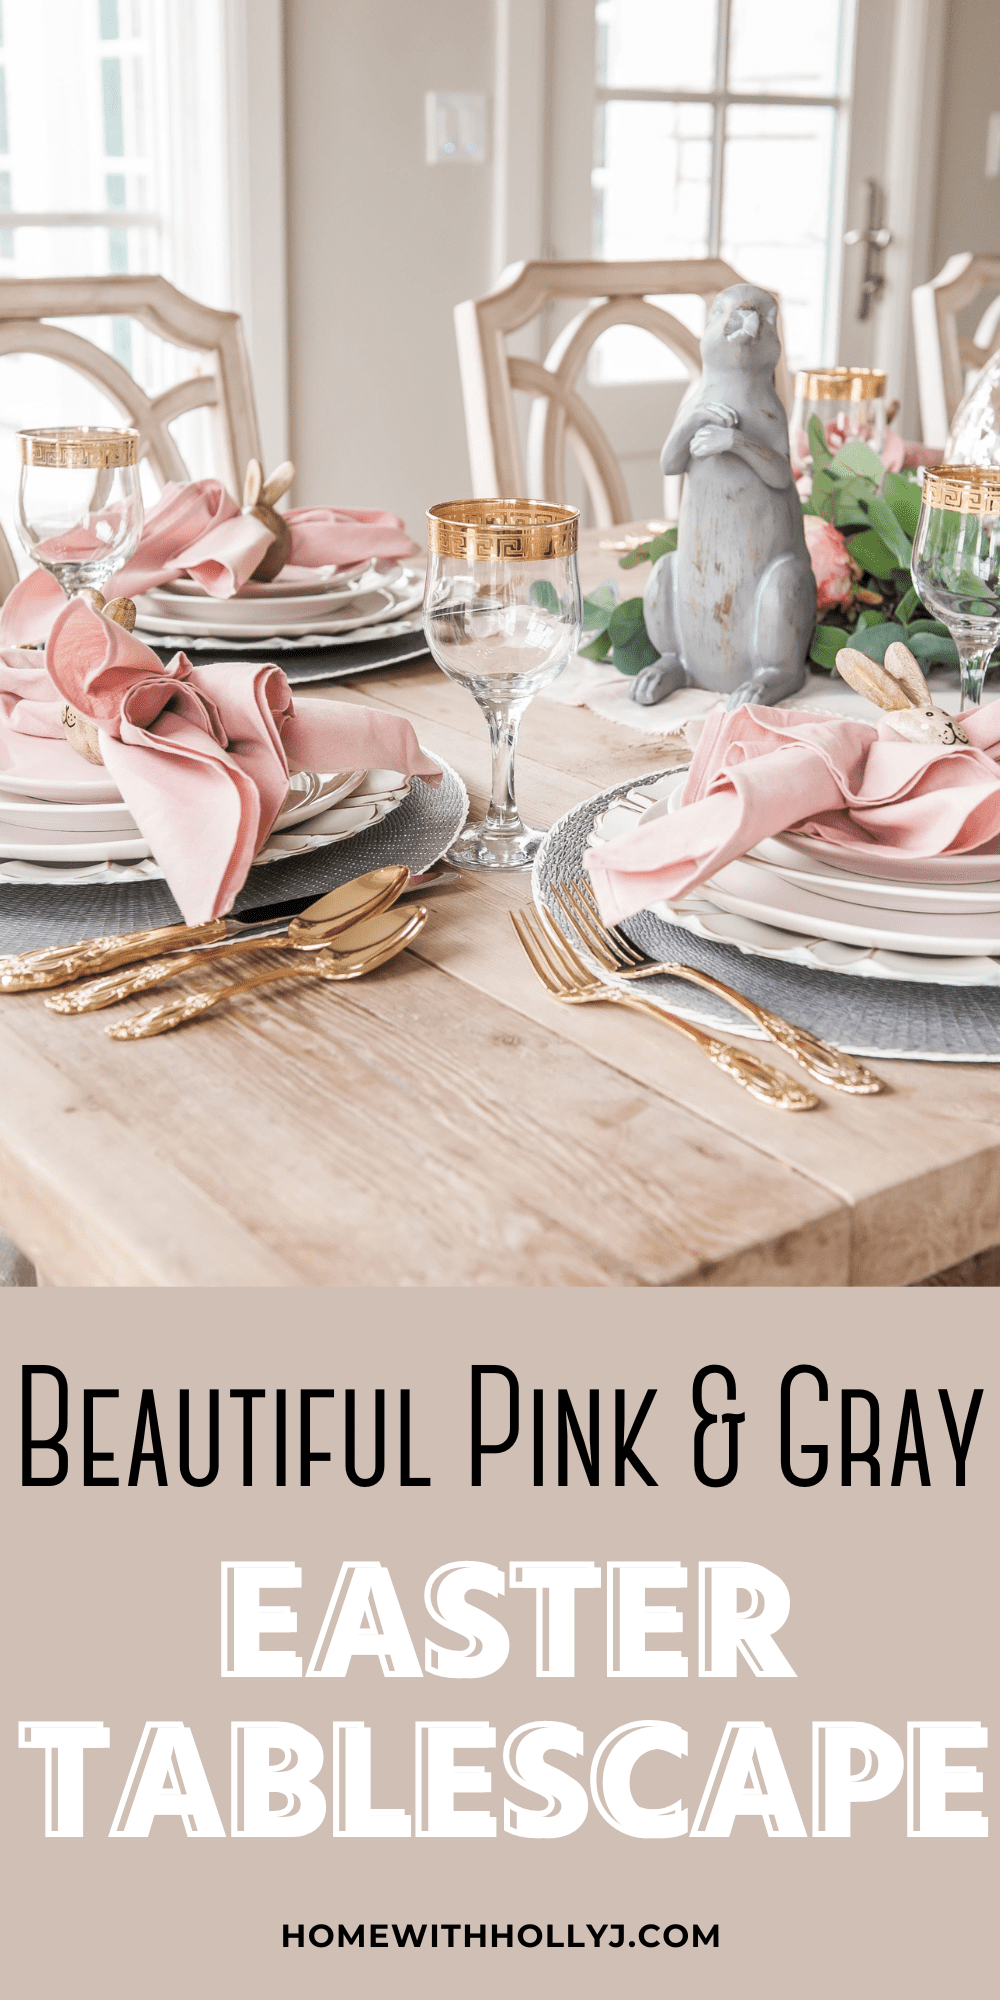 Sharing how to put together a Beautiful Easter Tablescape with neutral pinks and grays for the table settings. Learn more here.